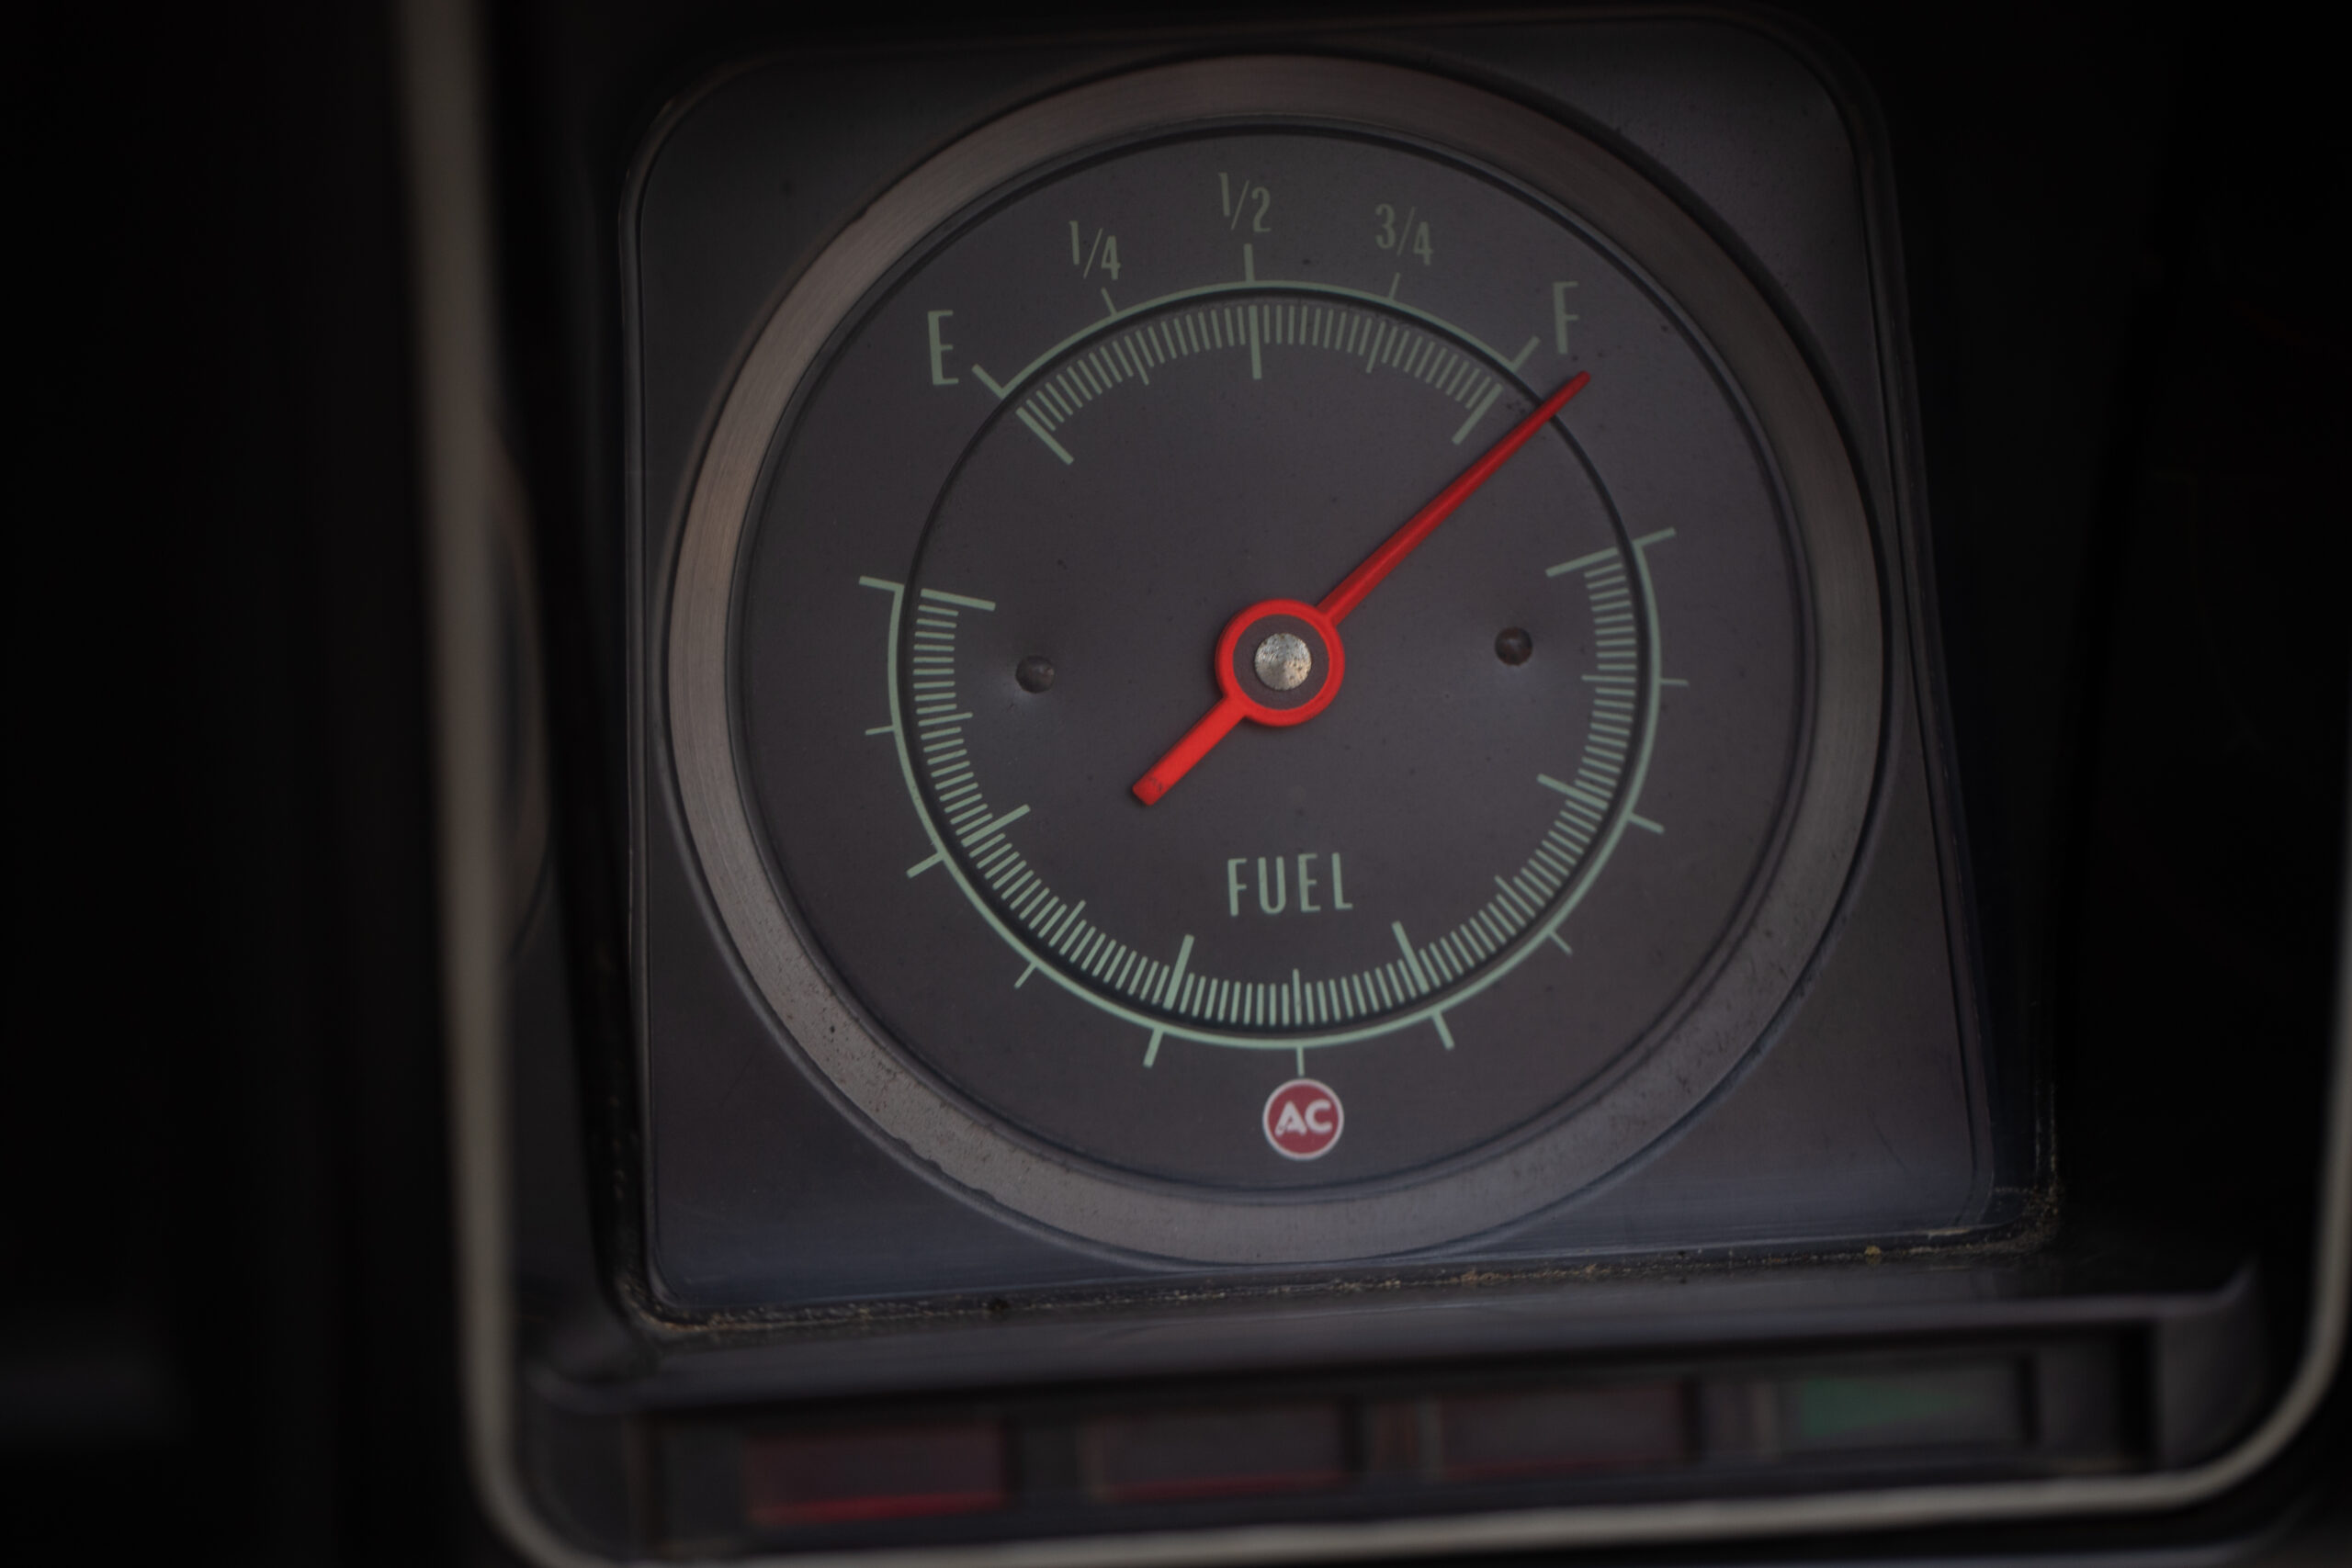 Analog fuel gauge in a vehicle showing a full tank (needle pointing to "F").